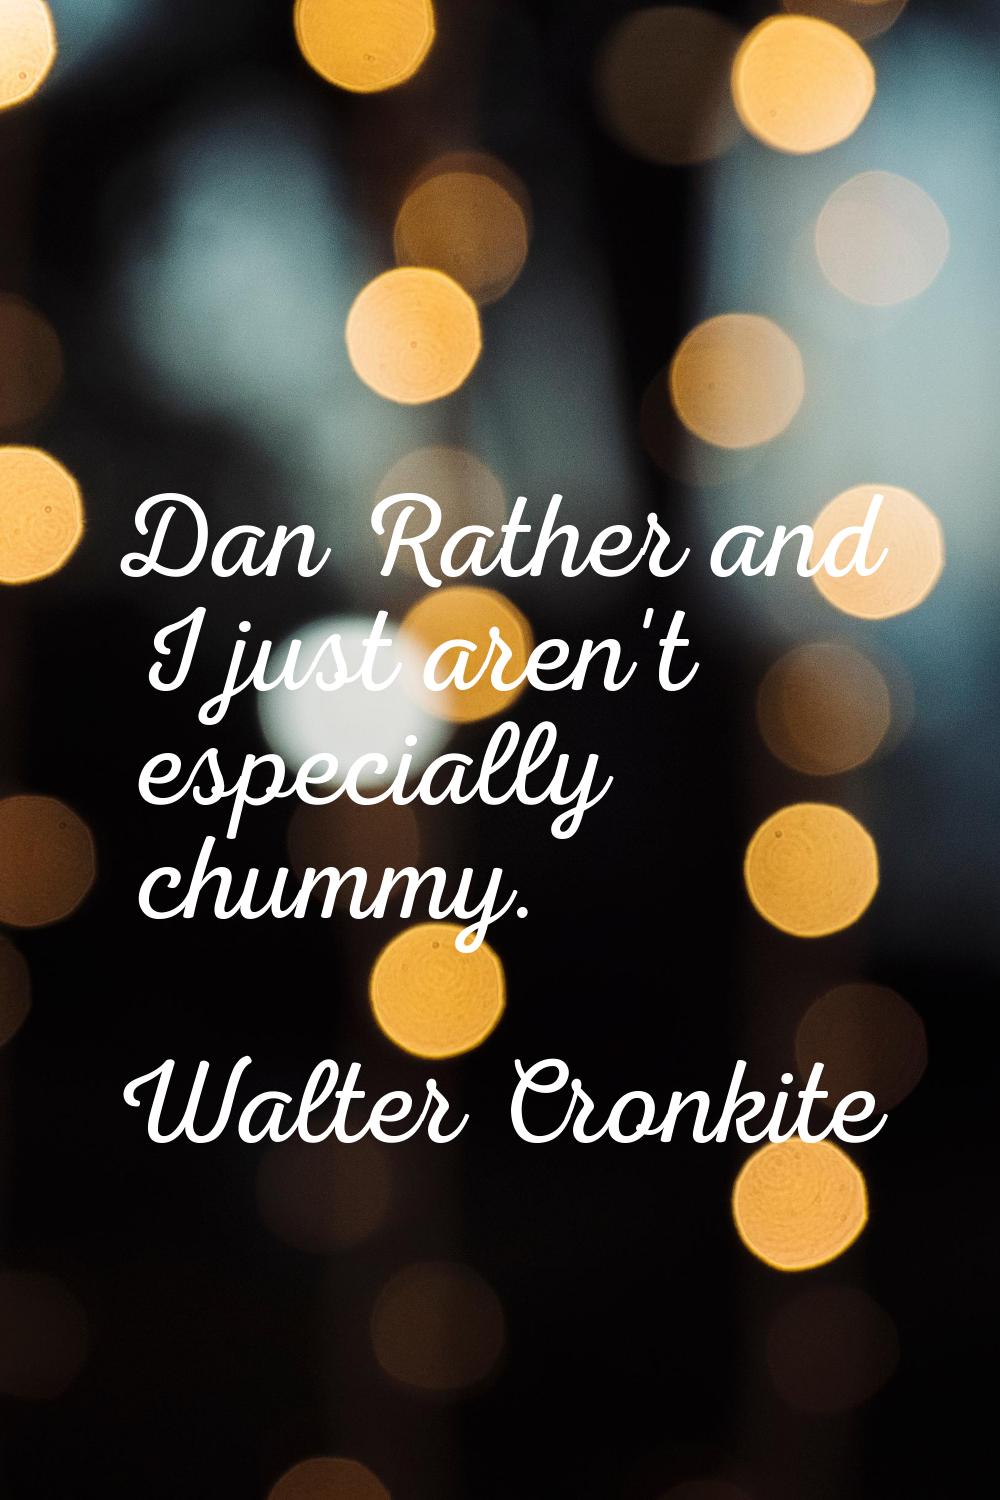 Dan Rather and I just aren't especially chummy.